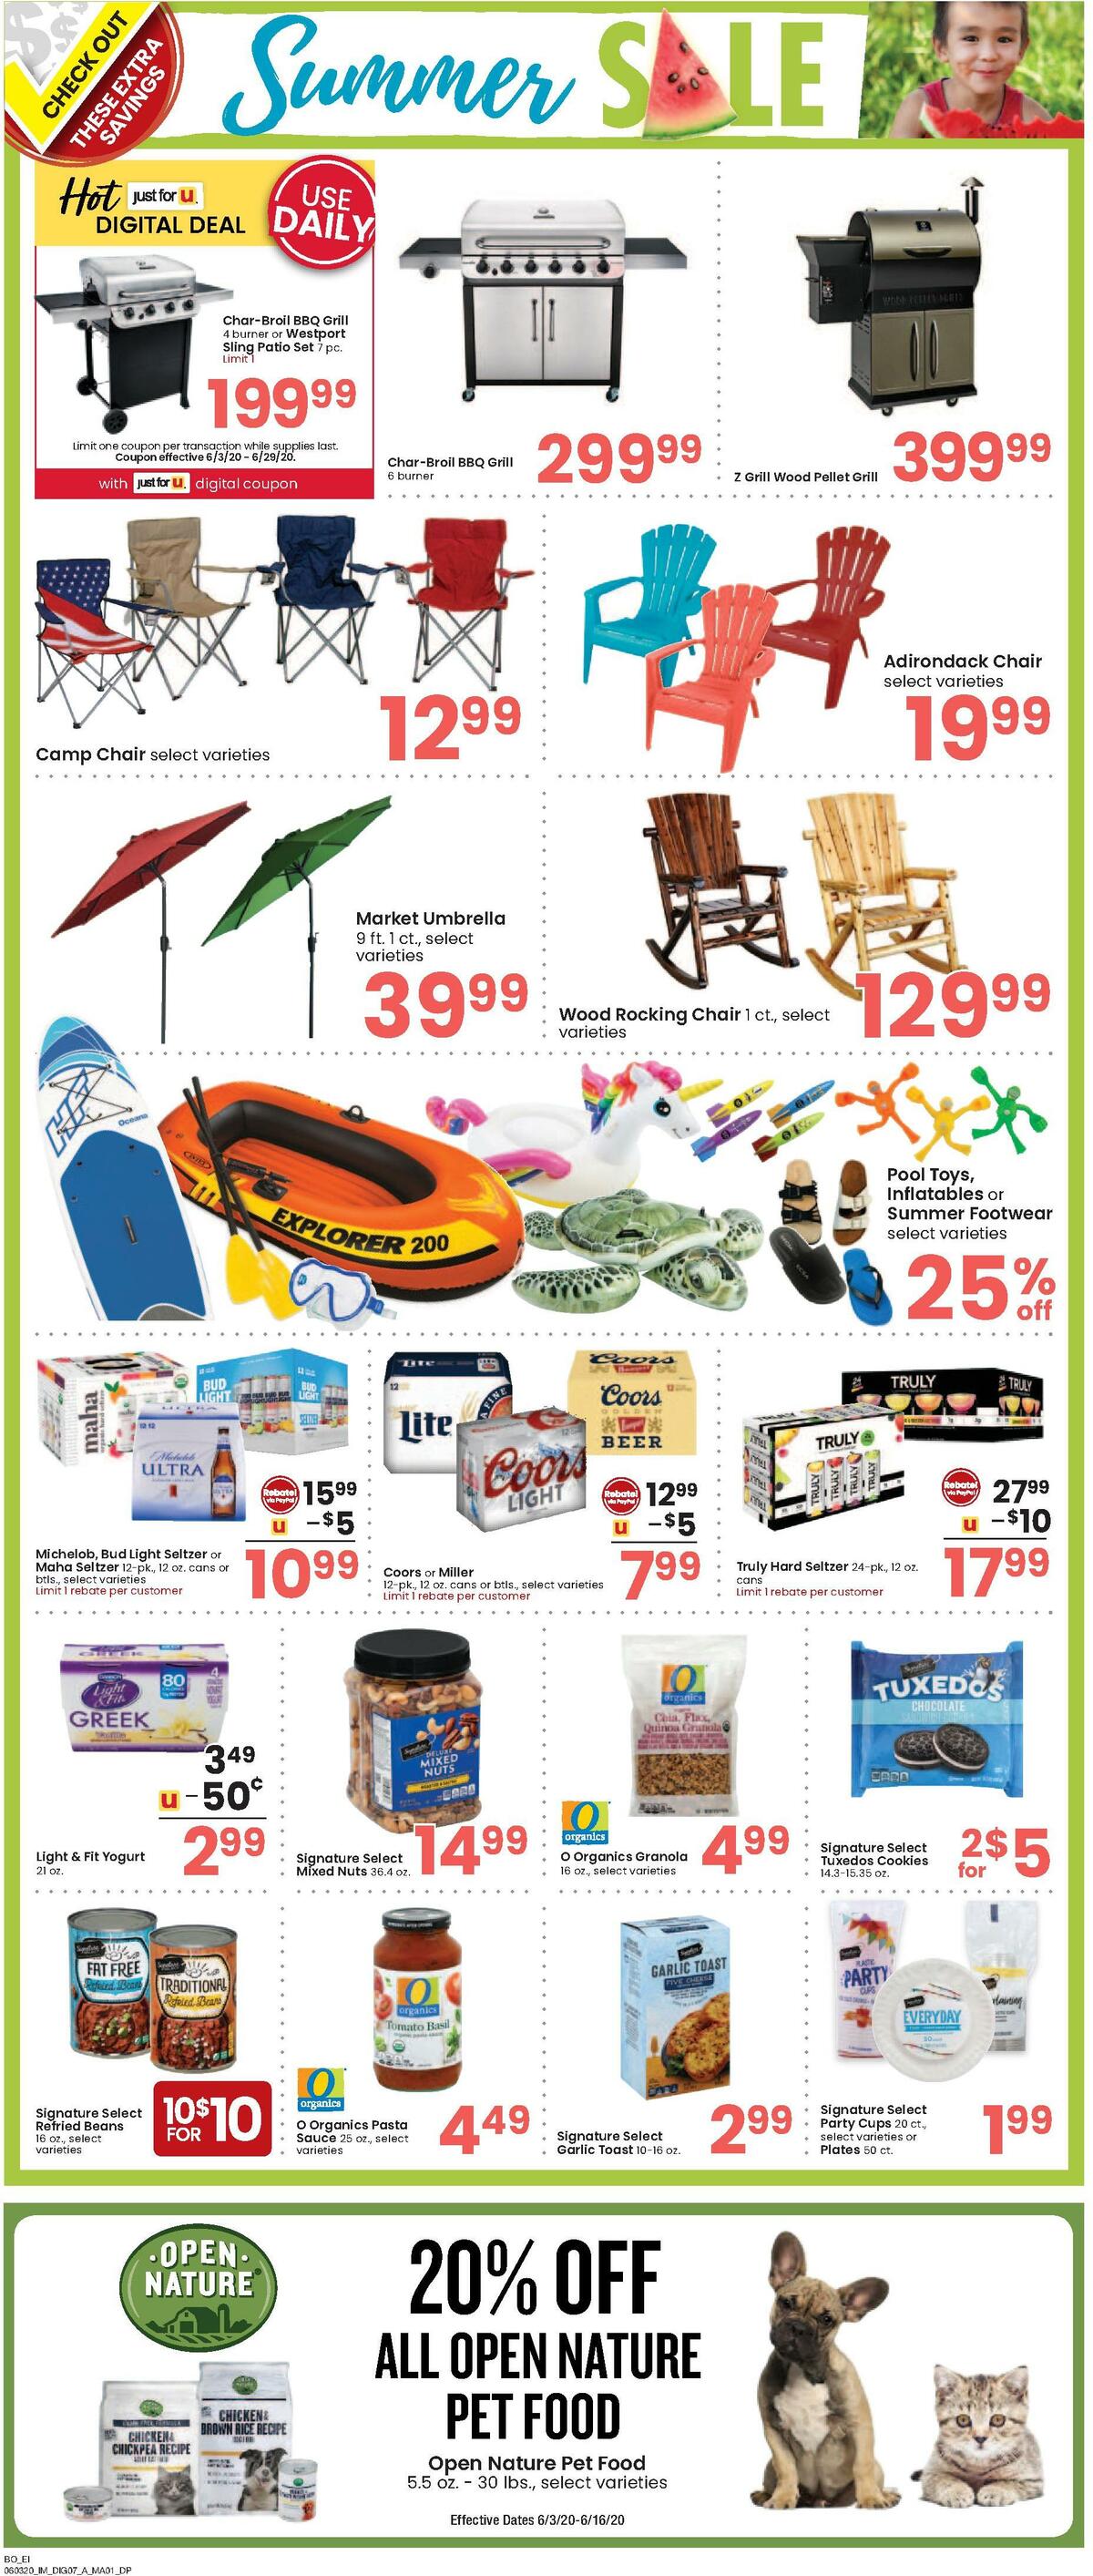 Albertsons Weekly Ad from June 3